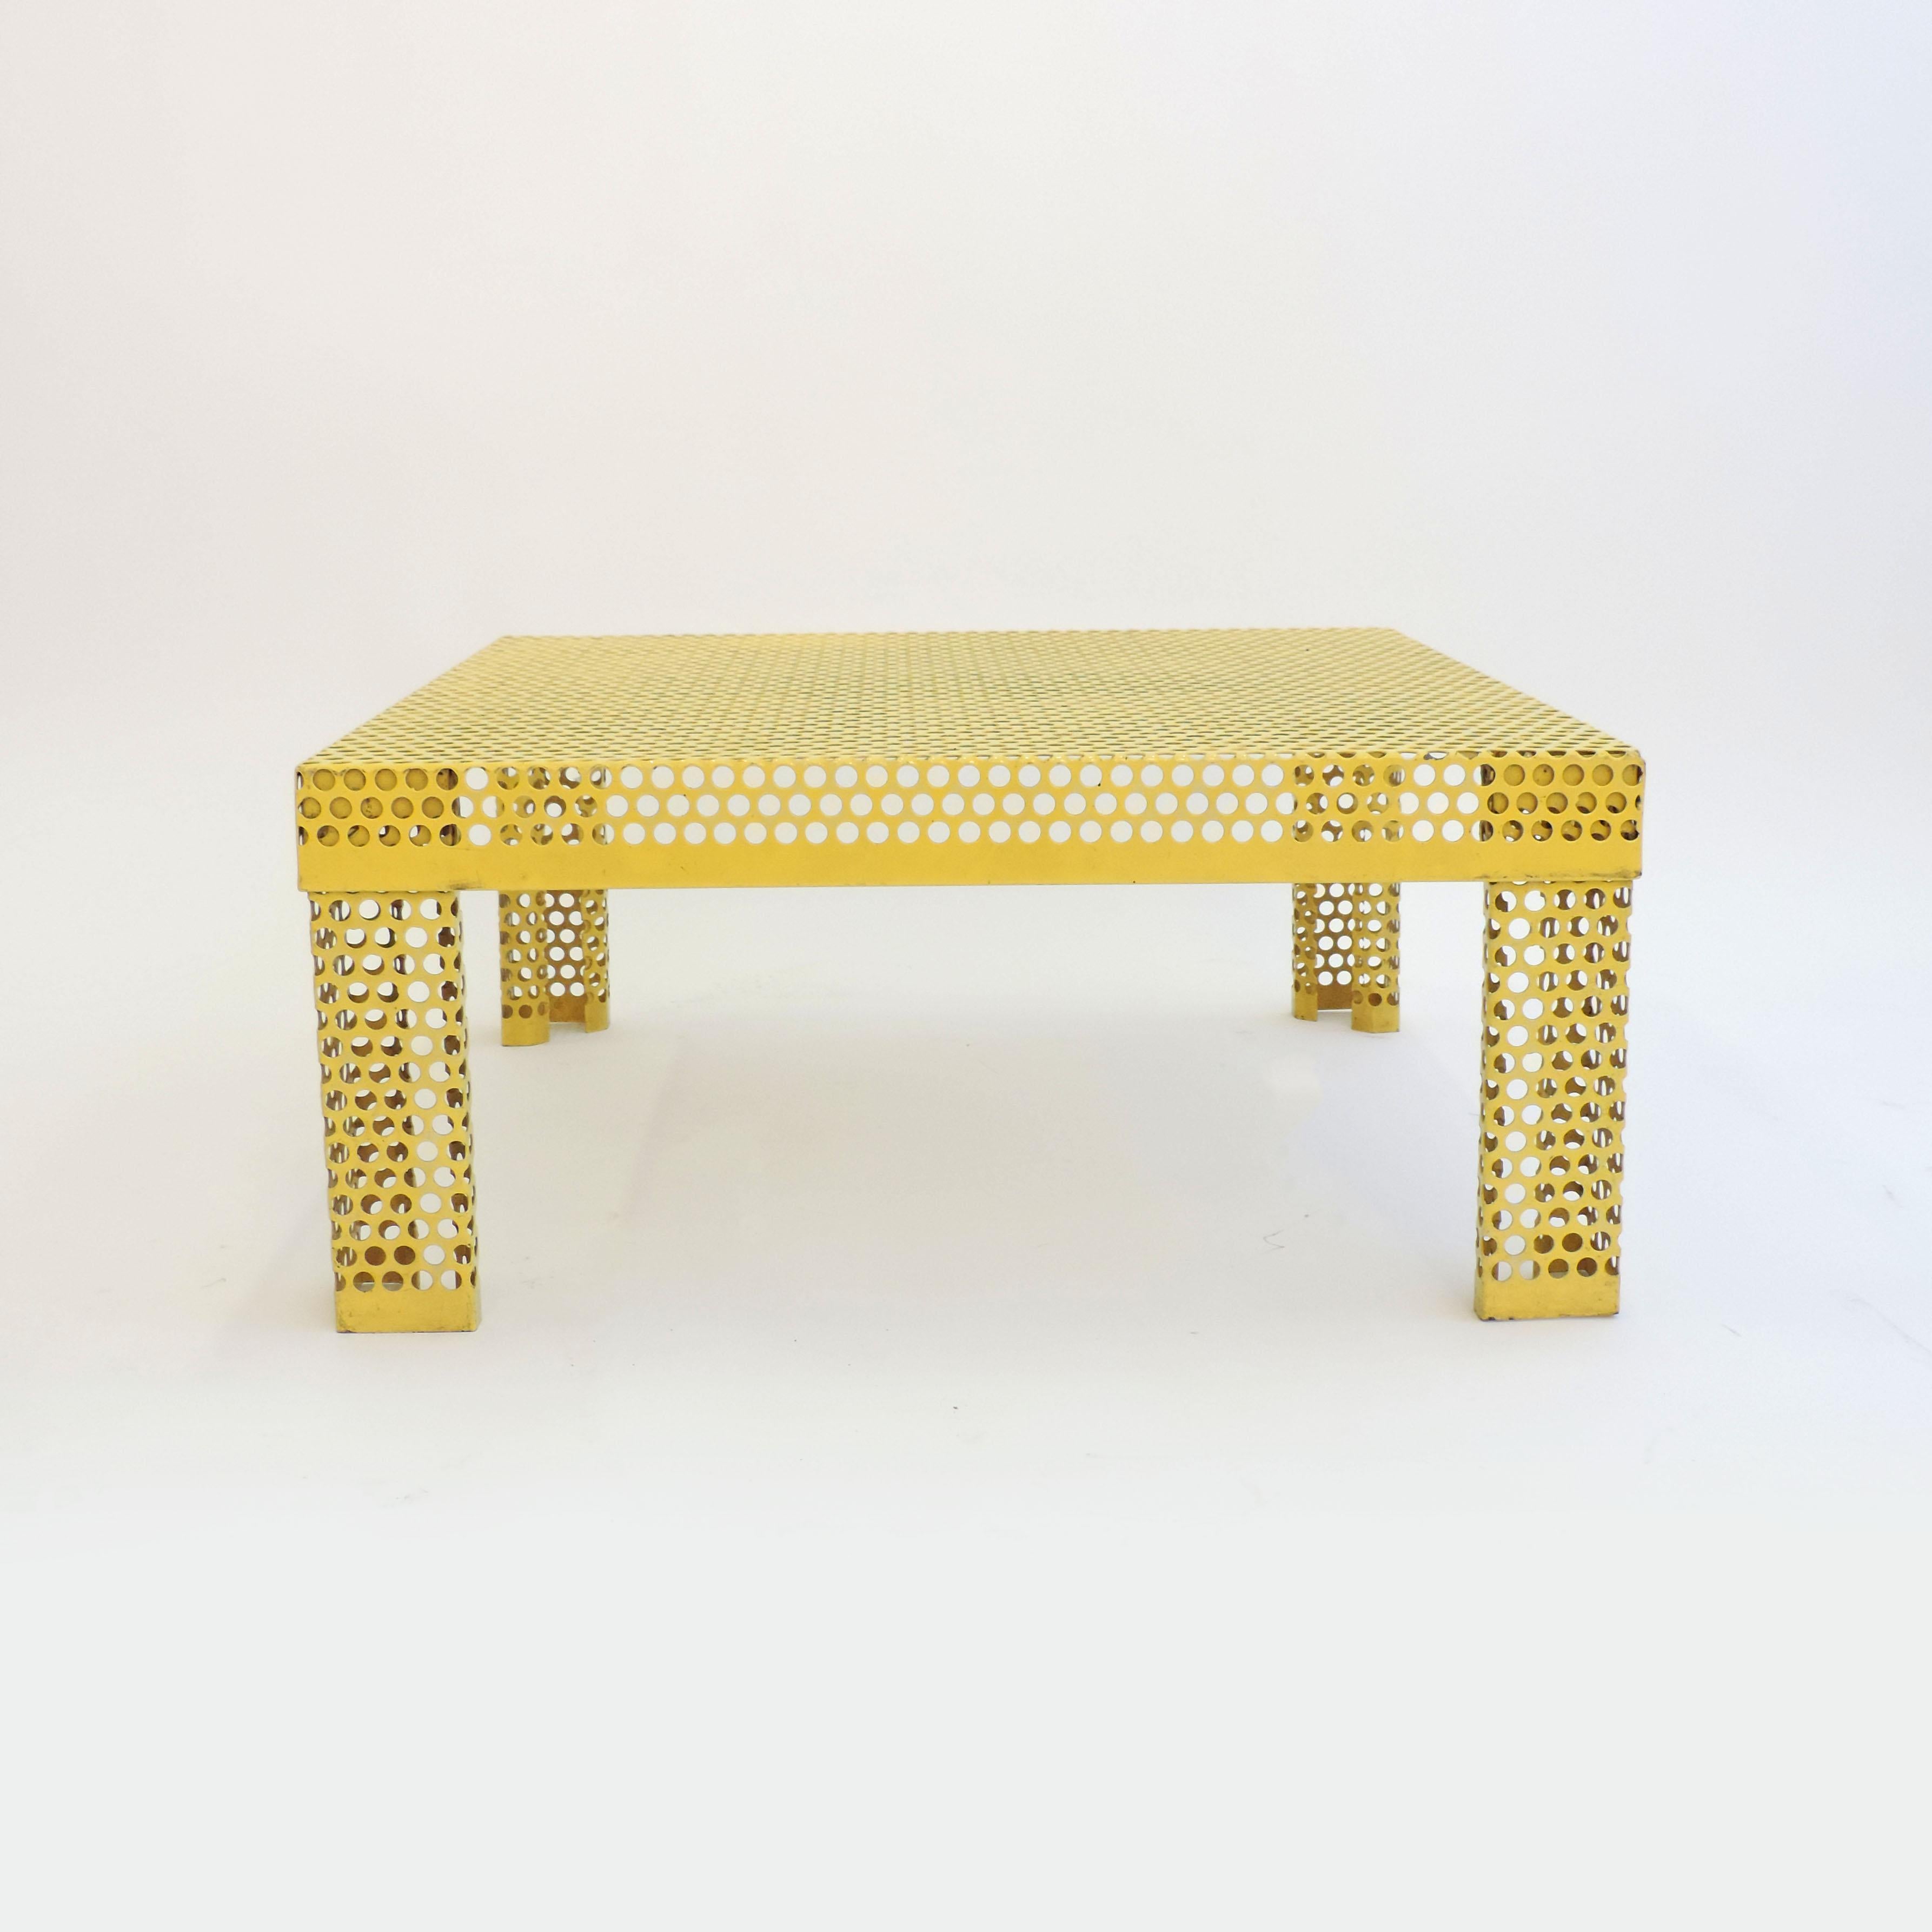 Lacquered 'Pleinair' Low Table in Perforated Metal by Ammannati & Vitelli for Brunati